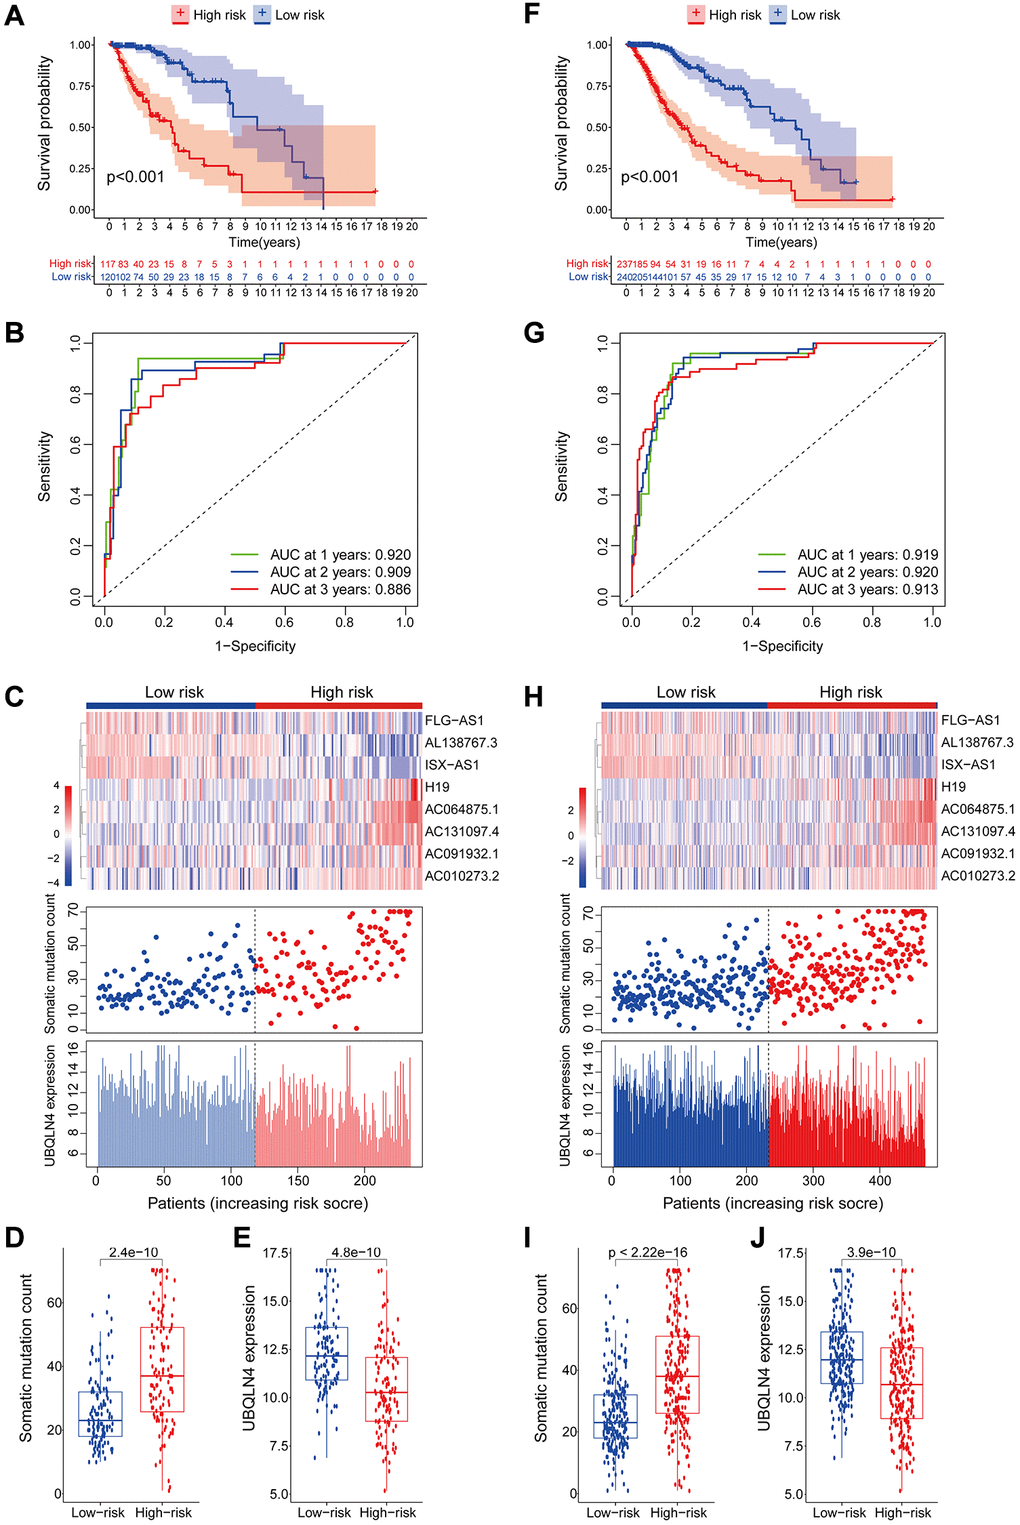 Validation of the lncRNA signature for genomic instability used to predict outcomes in the testing and TCGA set. (A) Validation of overall survival in low- or high-risk patients predicted by pooling GILncSig with Kaplan-Meier estimates. (B) Time-dependent ROC curves of GILncSig at 1, 2 and 3 years in the testing group. (C) Verification of LncRNA expression patterns, the profile of somatic mutations and UBQLN4 expression in patients in low- and high-risk groups. (D–E) Box plots for the distribution of somatic mutations and UBQLN4 expression in high- and low-risk groups of patients. (F–J) Verification of the above results using the TCGA set.